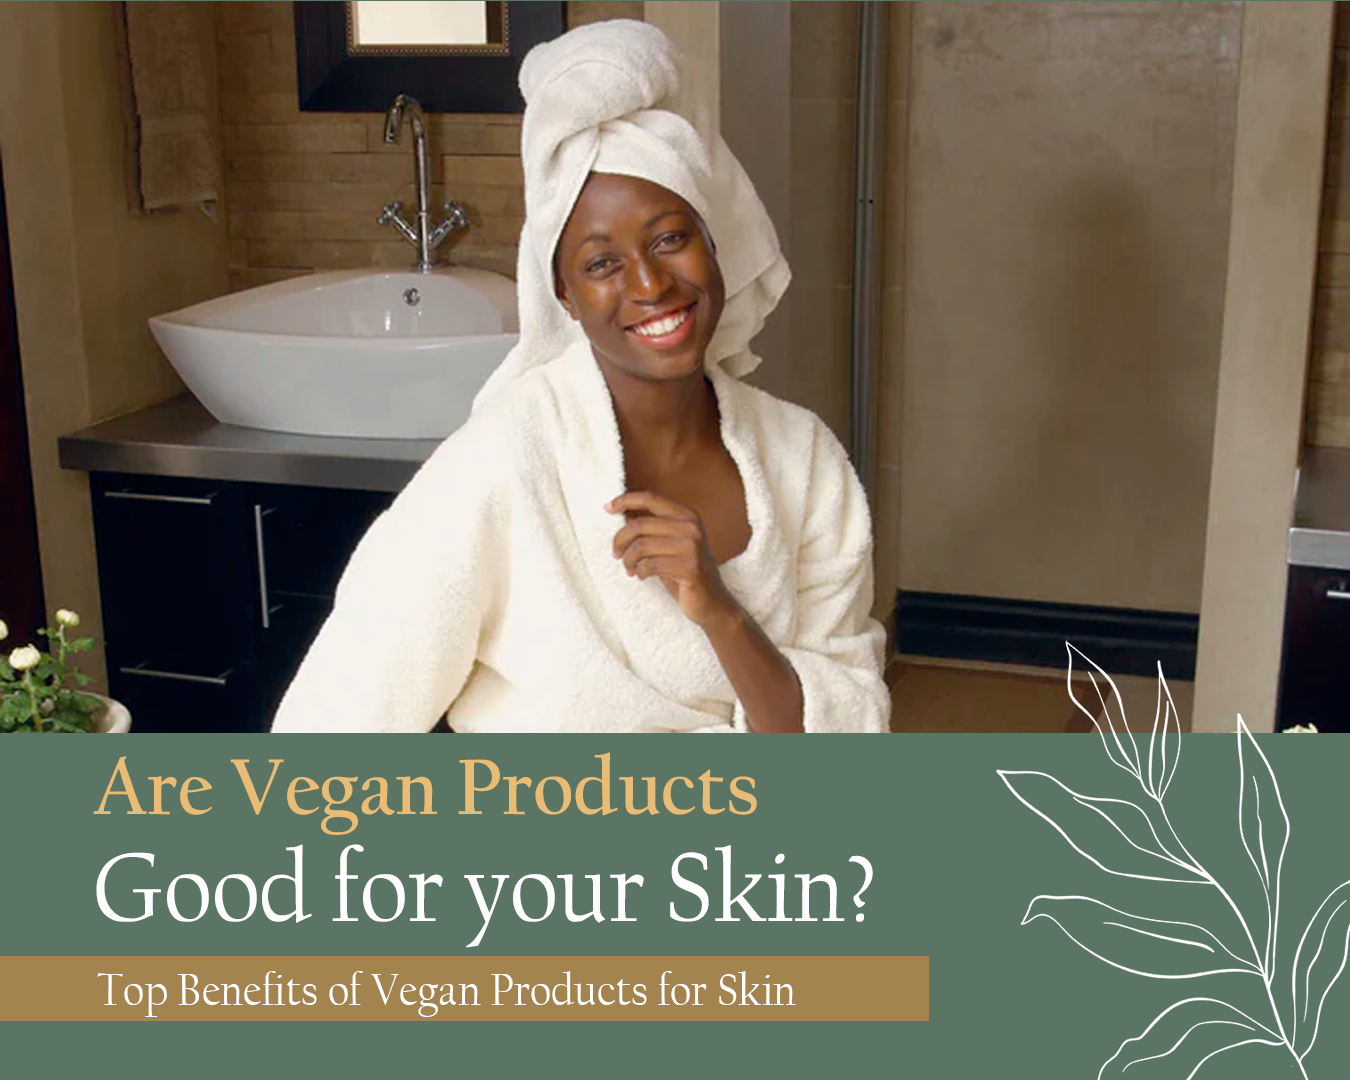 Are Vegan Products Good for your Skin? - Top Benefits of Vegan Products for Skin